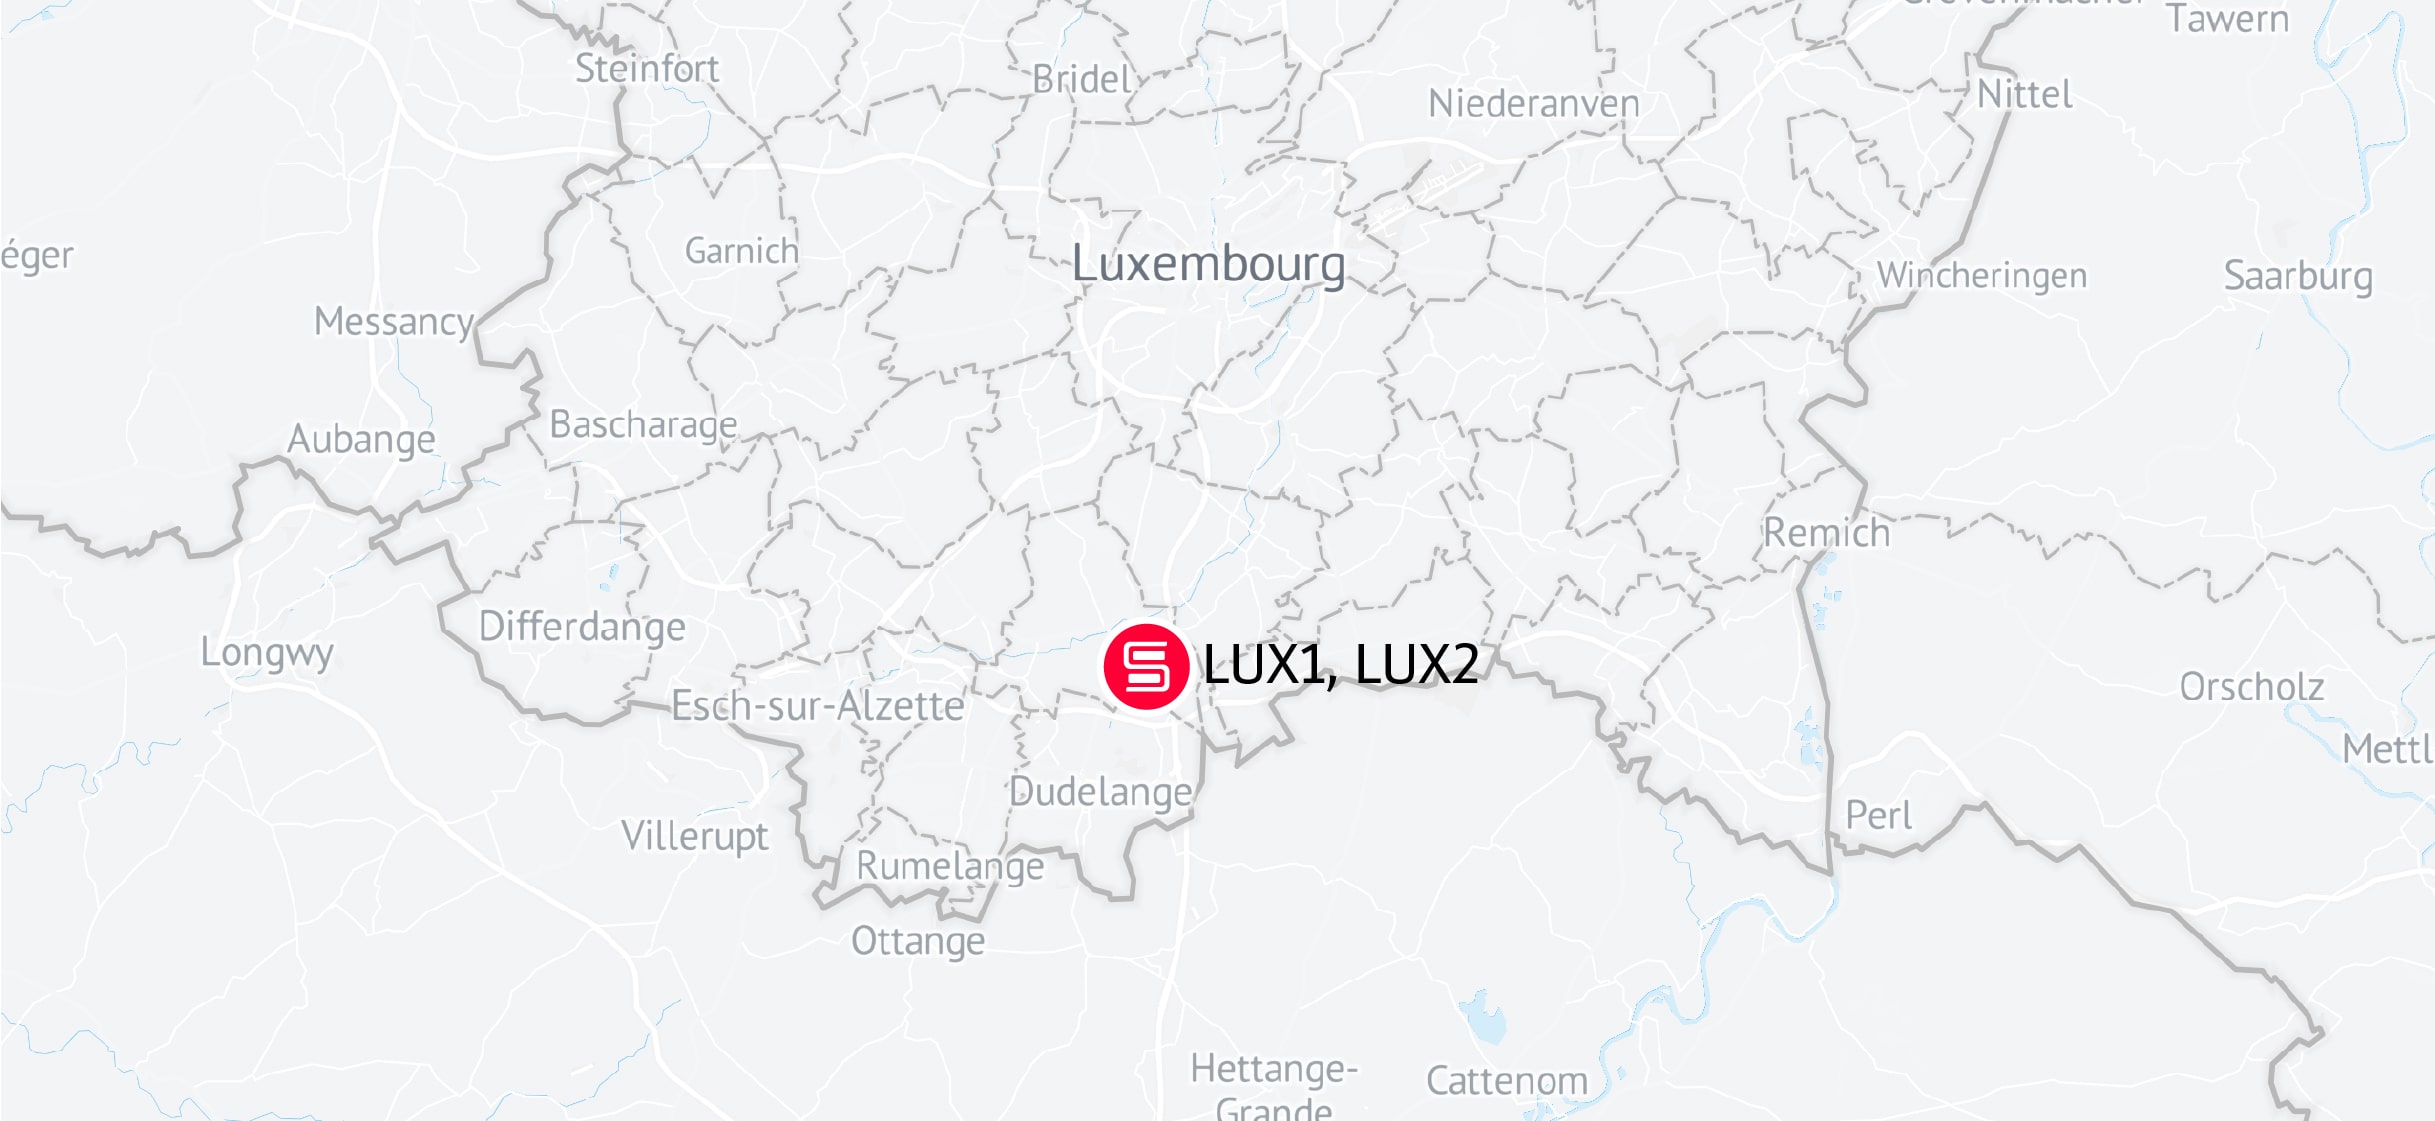 LUX1, LUX2 data center in Luxembourg